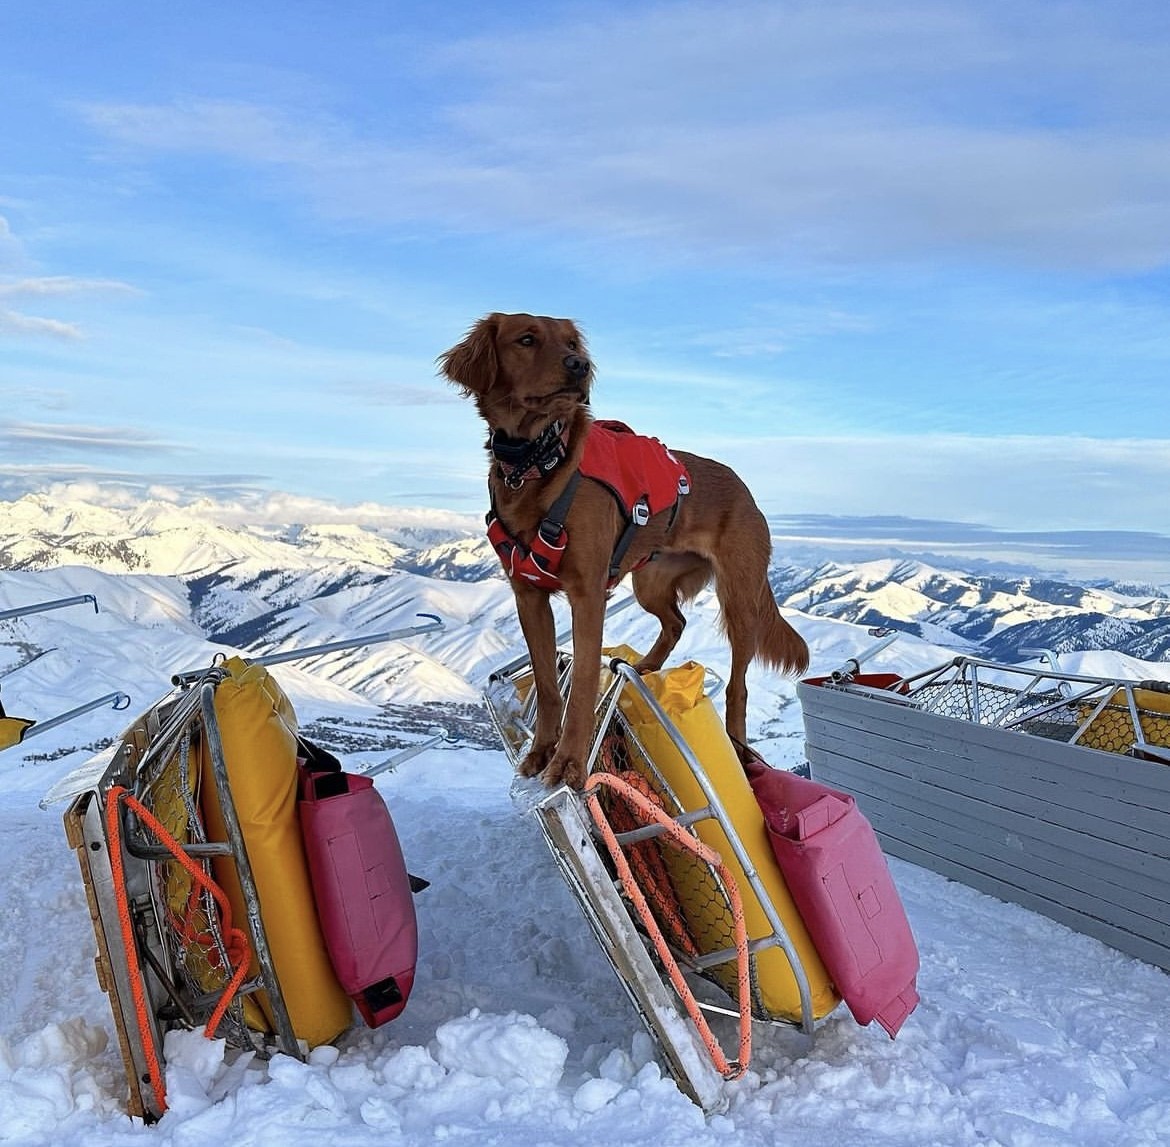 Avalanche dog, Ripley, appears standing atop a Ski Patrol sled.